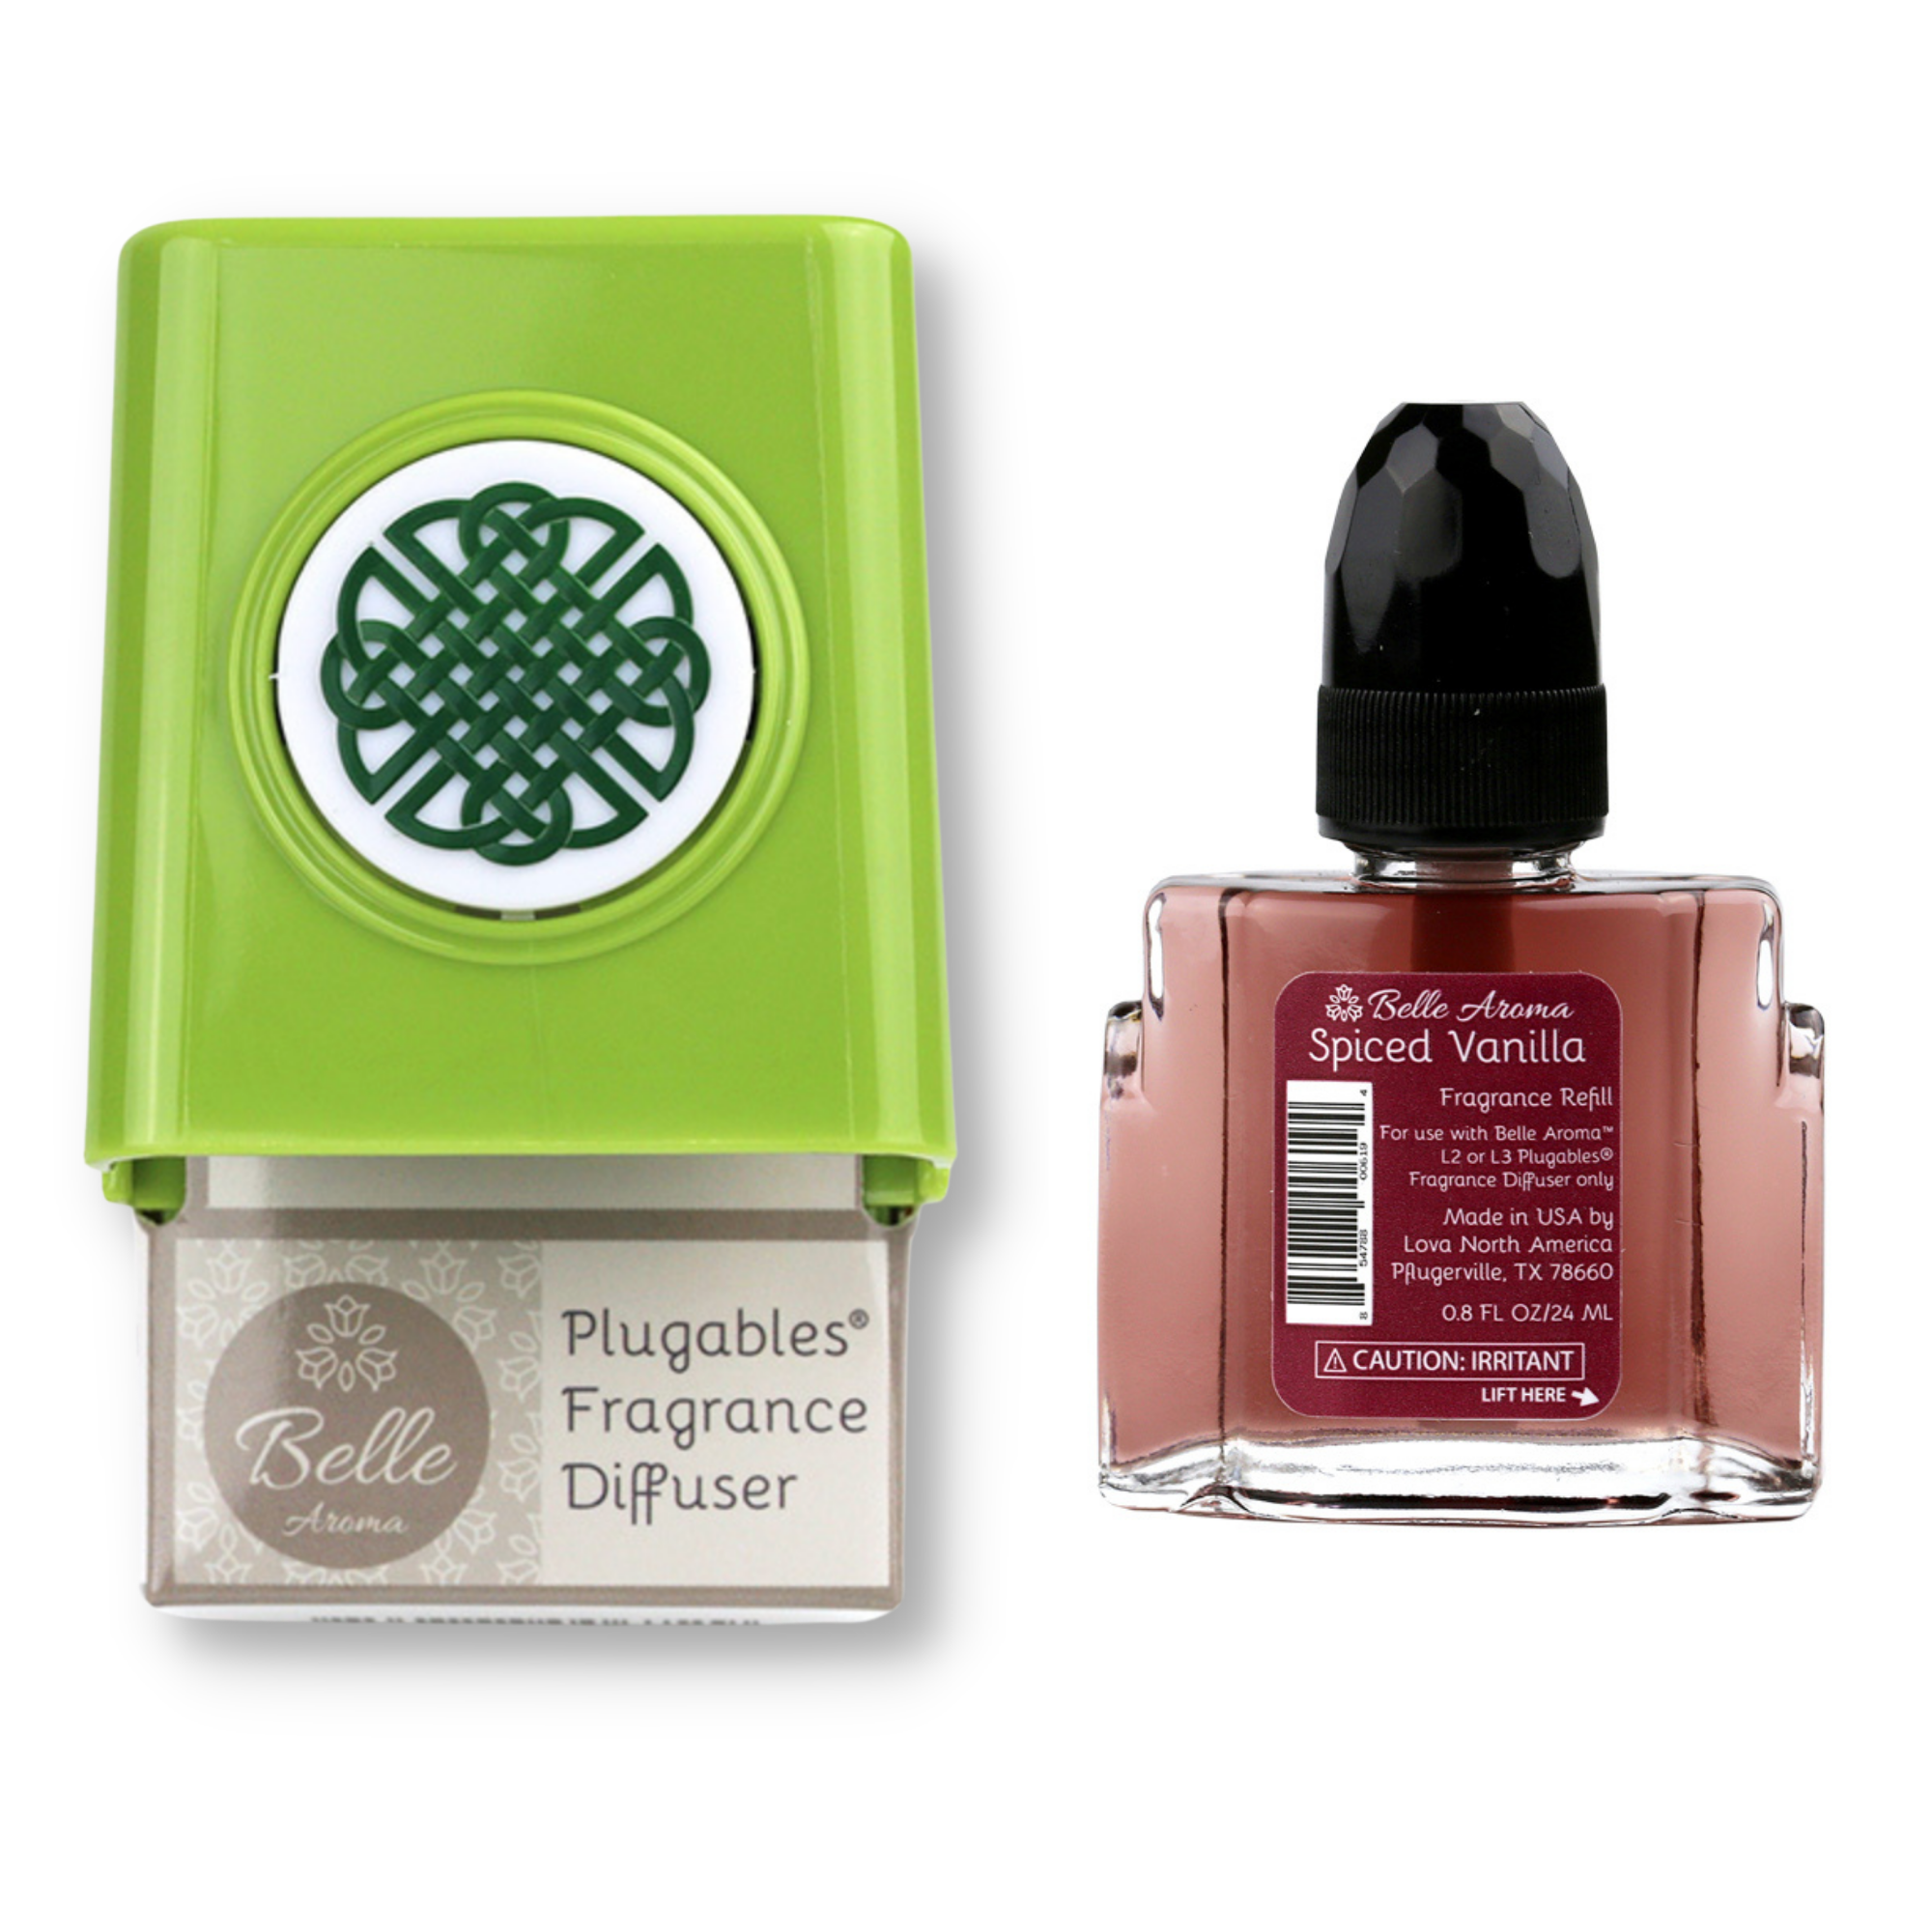 Celtic Knot Medallion Plugables® Plugin Electric Scented Oil Diffuser - Granny Smith with Spiced Vanilla Fragrance Oil Home Fragrance Accessories